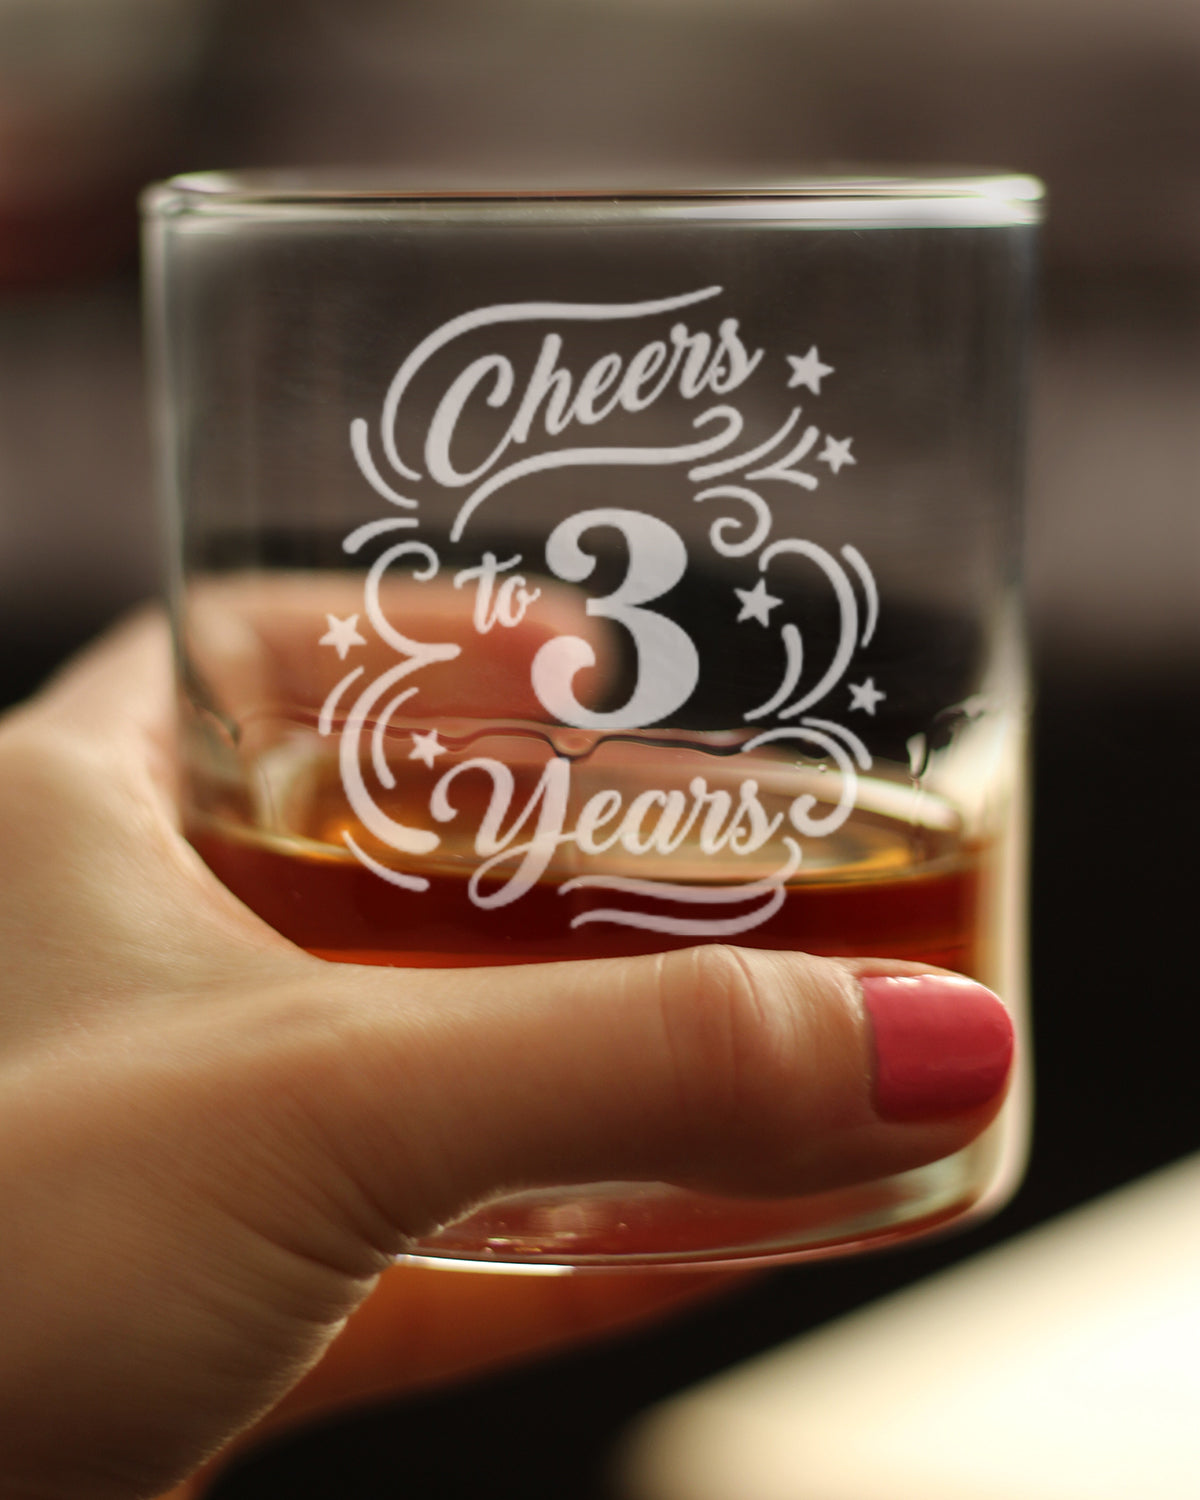 Cheers to 3 Years - Whiskey Rocks Glass Gifts for Women &amp; Men - 3rd Anniversary Party Decor - 10.25 Oz Glasses